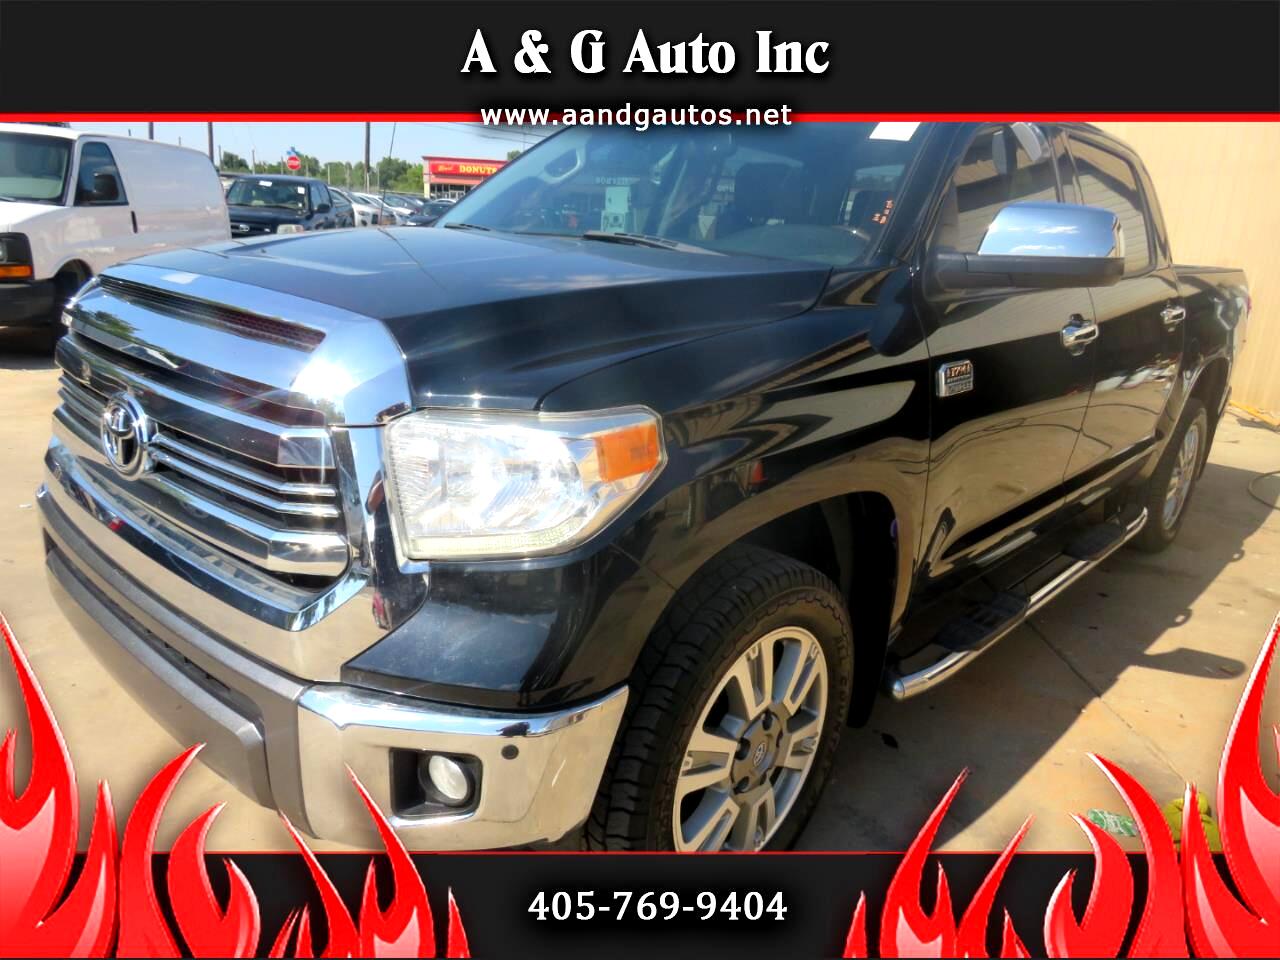 2016 Toyota Tundra for sale in Oklahoma City OK 73141 by A & G Auto Inc